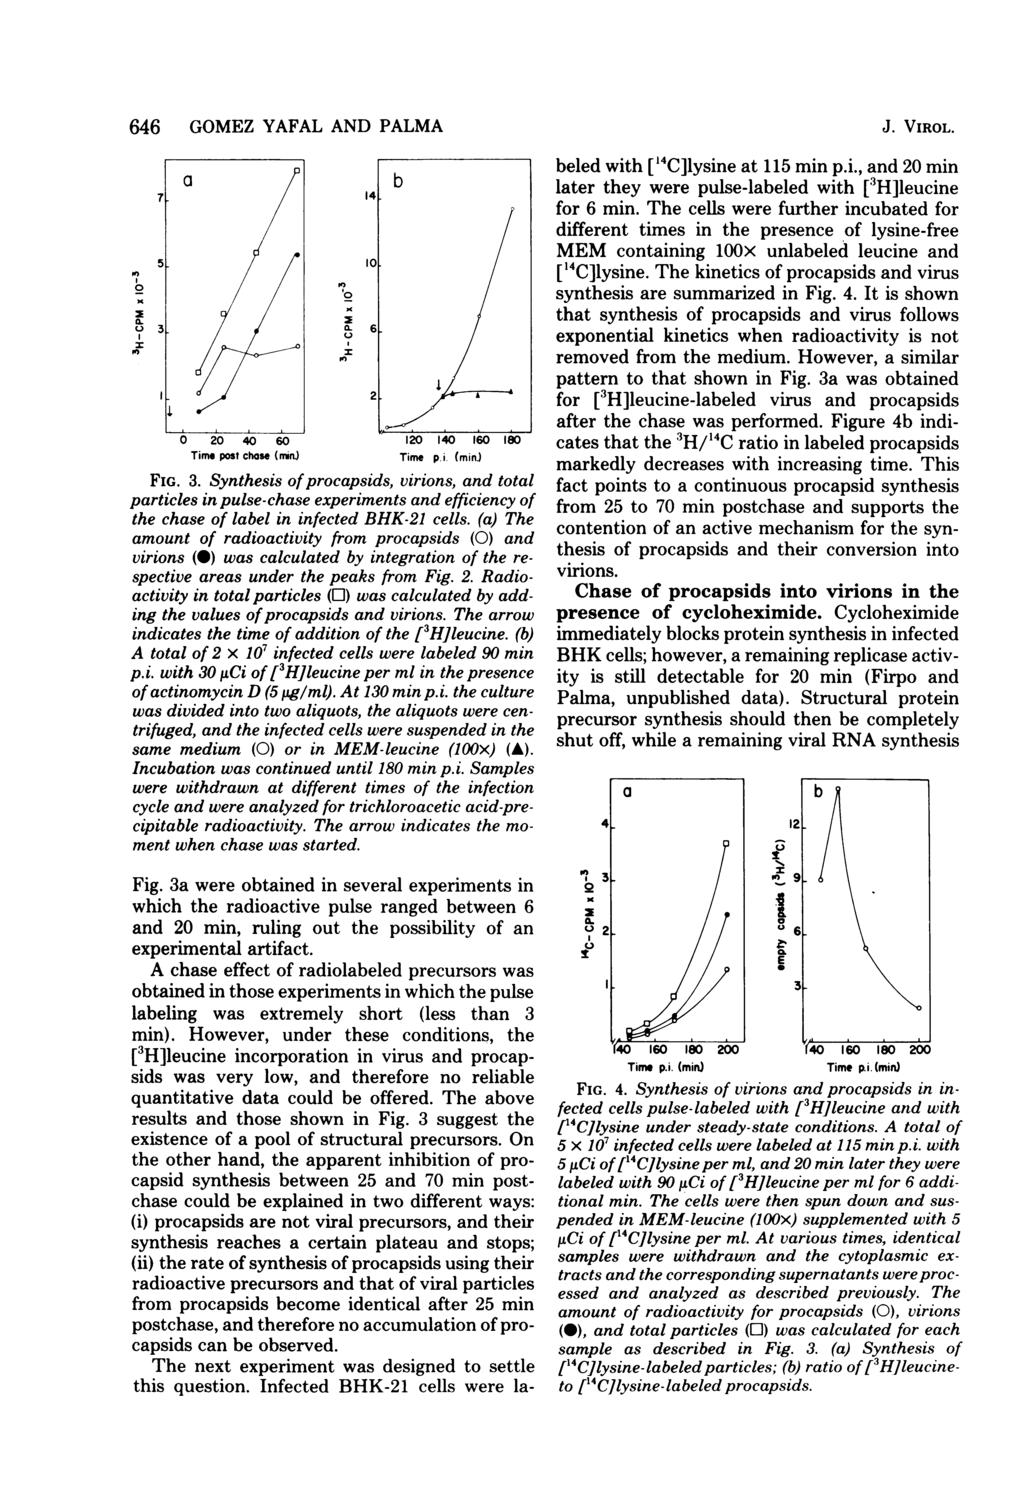 646 GOMEZ YAFAL AND PALMA I 7 5 3 2 4 6 Time post chose (nrn) 12 14 16 18 Time p. i. (min.) FIG. 3. Synthesis ofprocapsids, virions, and total particles in pulse-chase experiments and efficiency of the chase of label in infected BHK-21 cells.